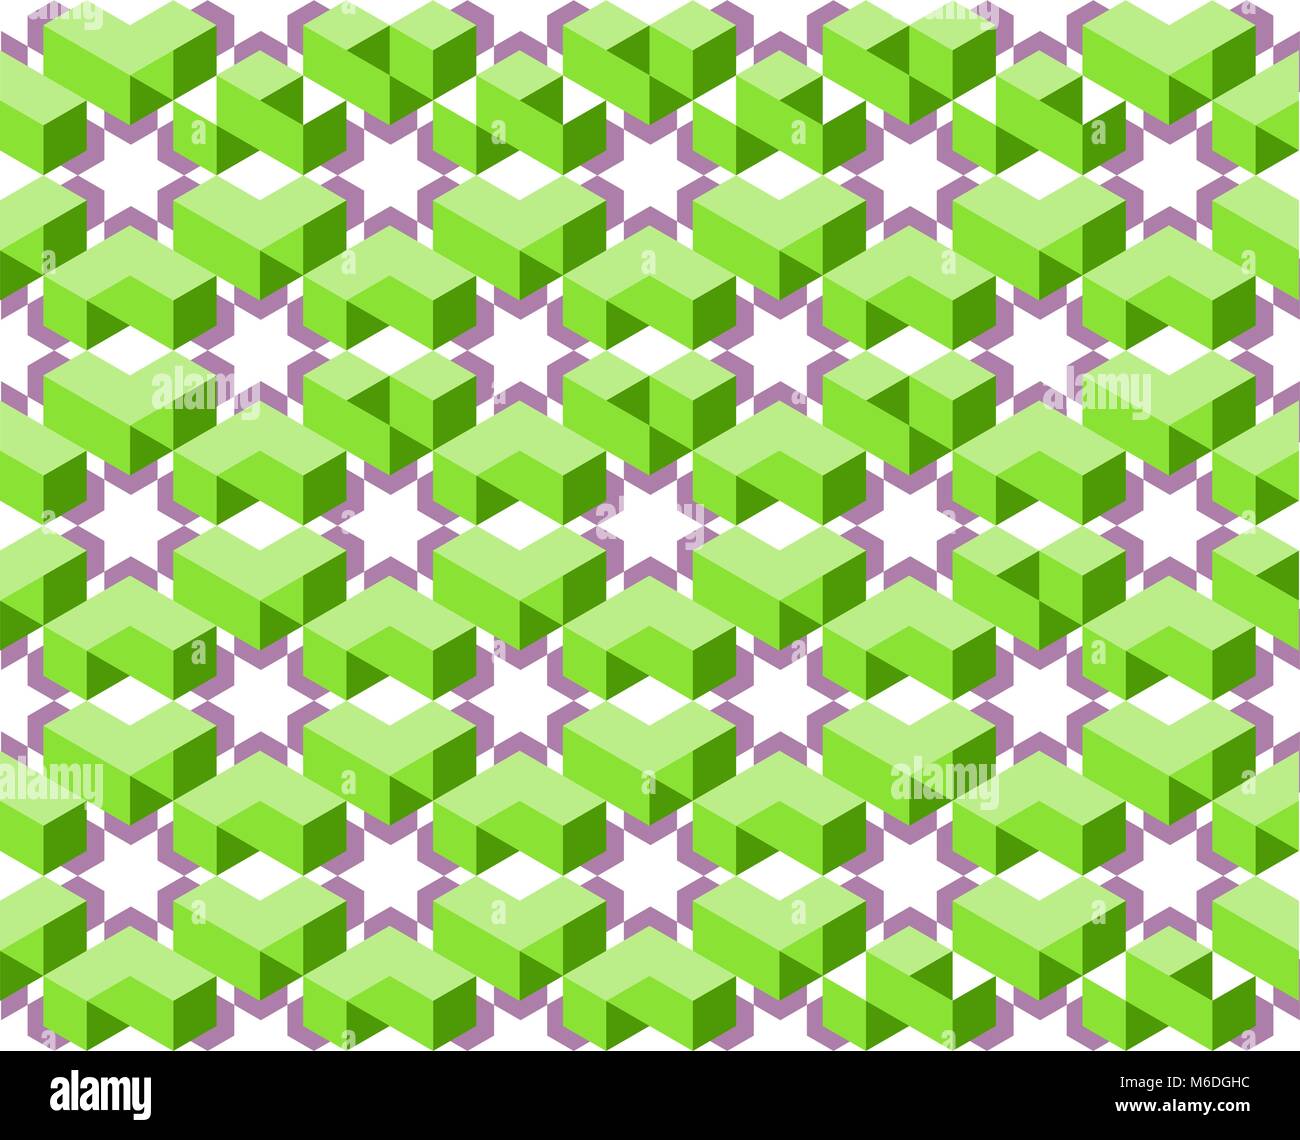 Geometric pattern of ultra violet and green color isolated on white background - Vector illustration, EPS10. Stock Vector